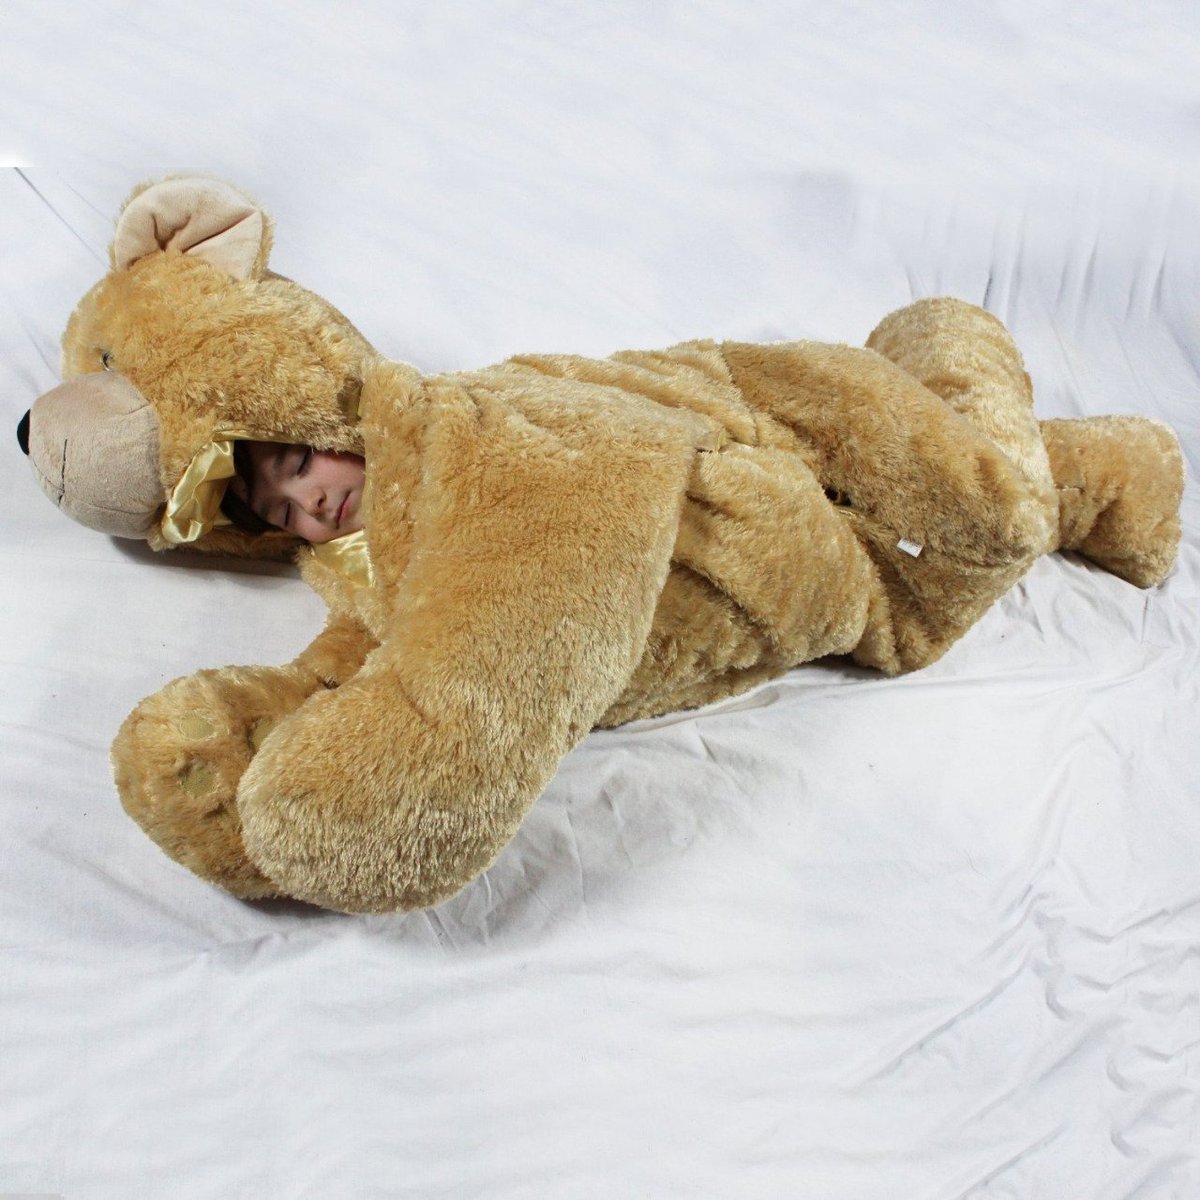 Fetch Gifts On Twitter Realistic Bear Sleeping Bag Https Tco